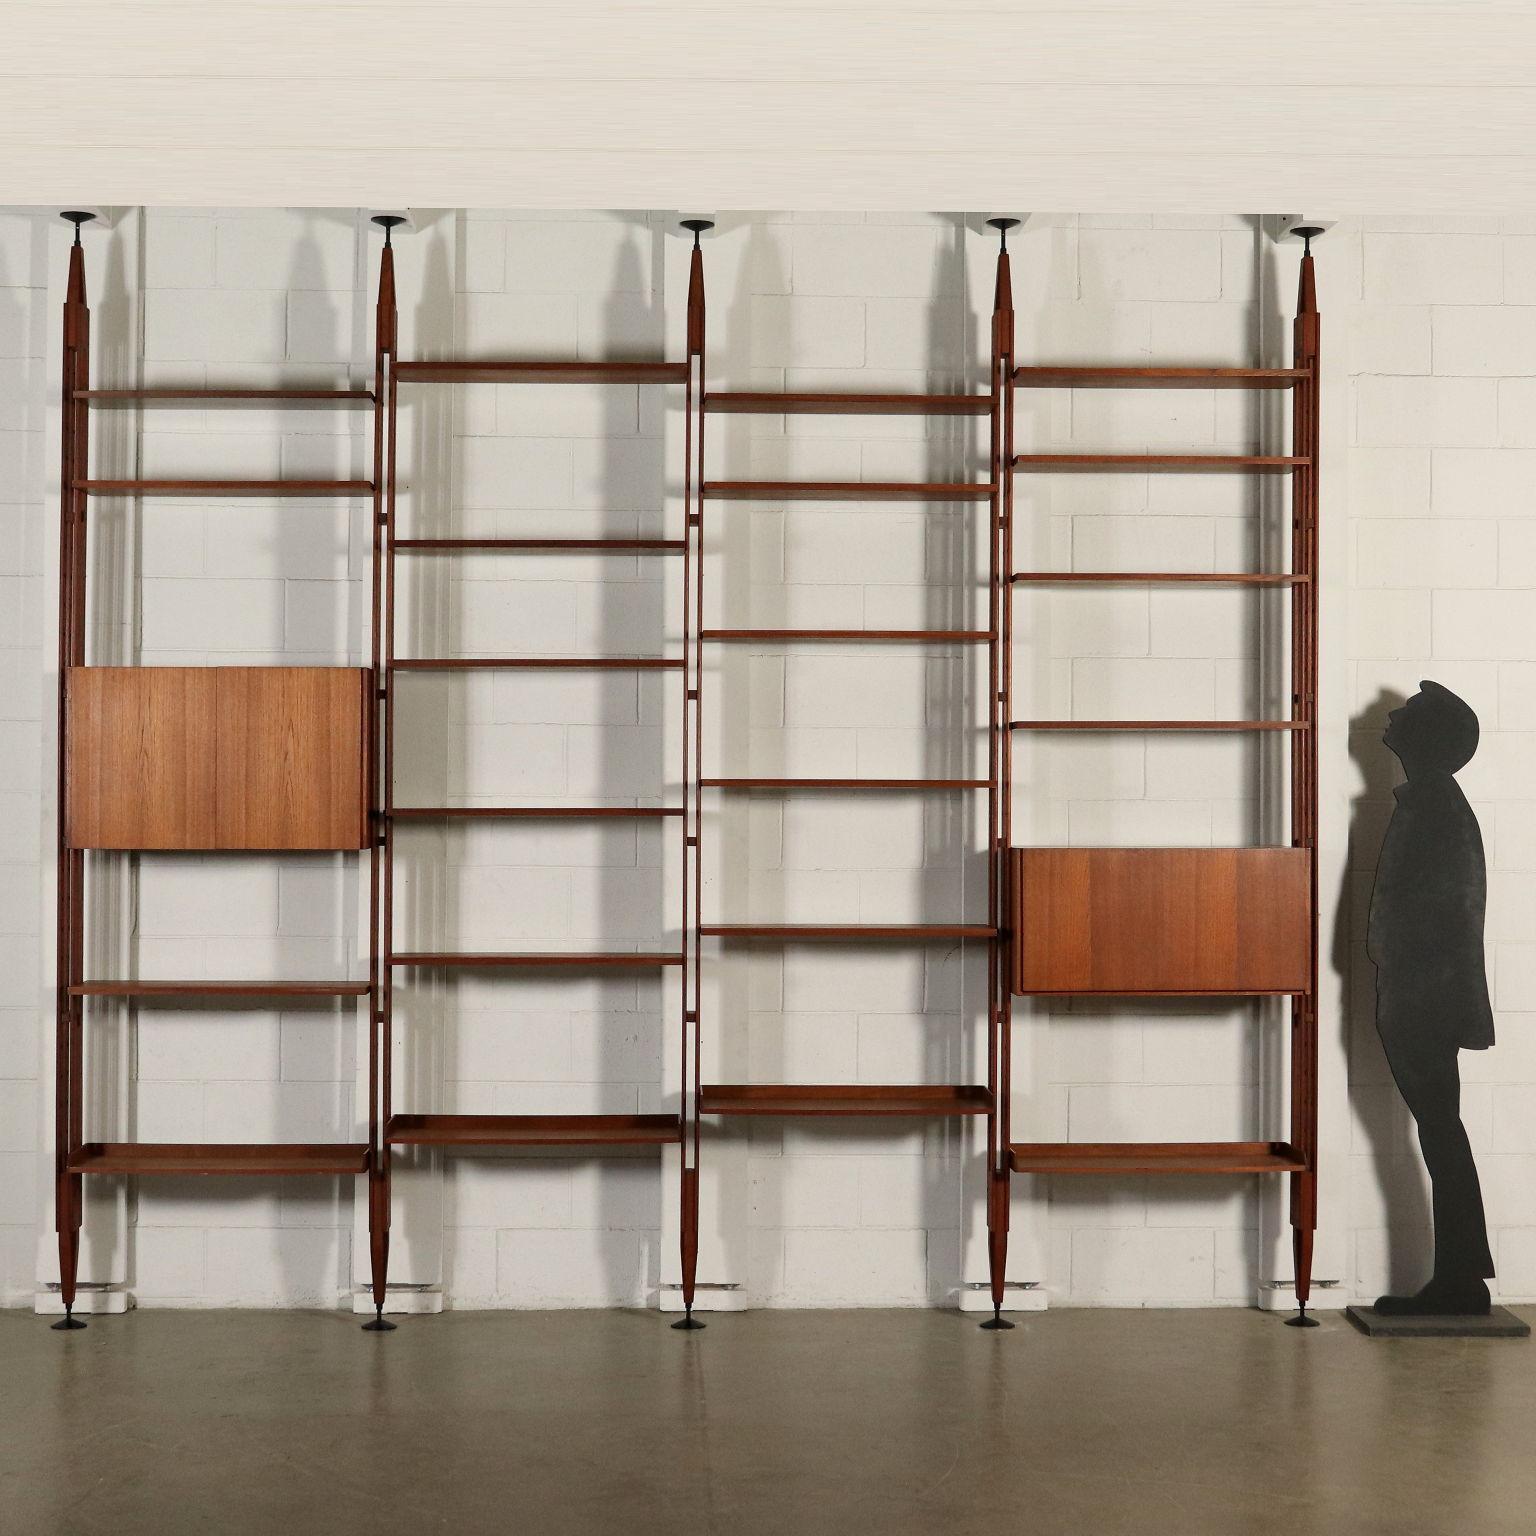 Modular floor-to-ceiling bookcase designed by Franco Albini (1905-1977) for Poggi. Adjustable shelves and containers, solid teak uprights, teak veneered shelves and containers. Model: LB7. Manufactured in Italy, 1960s.